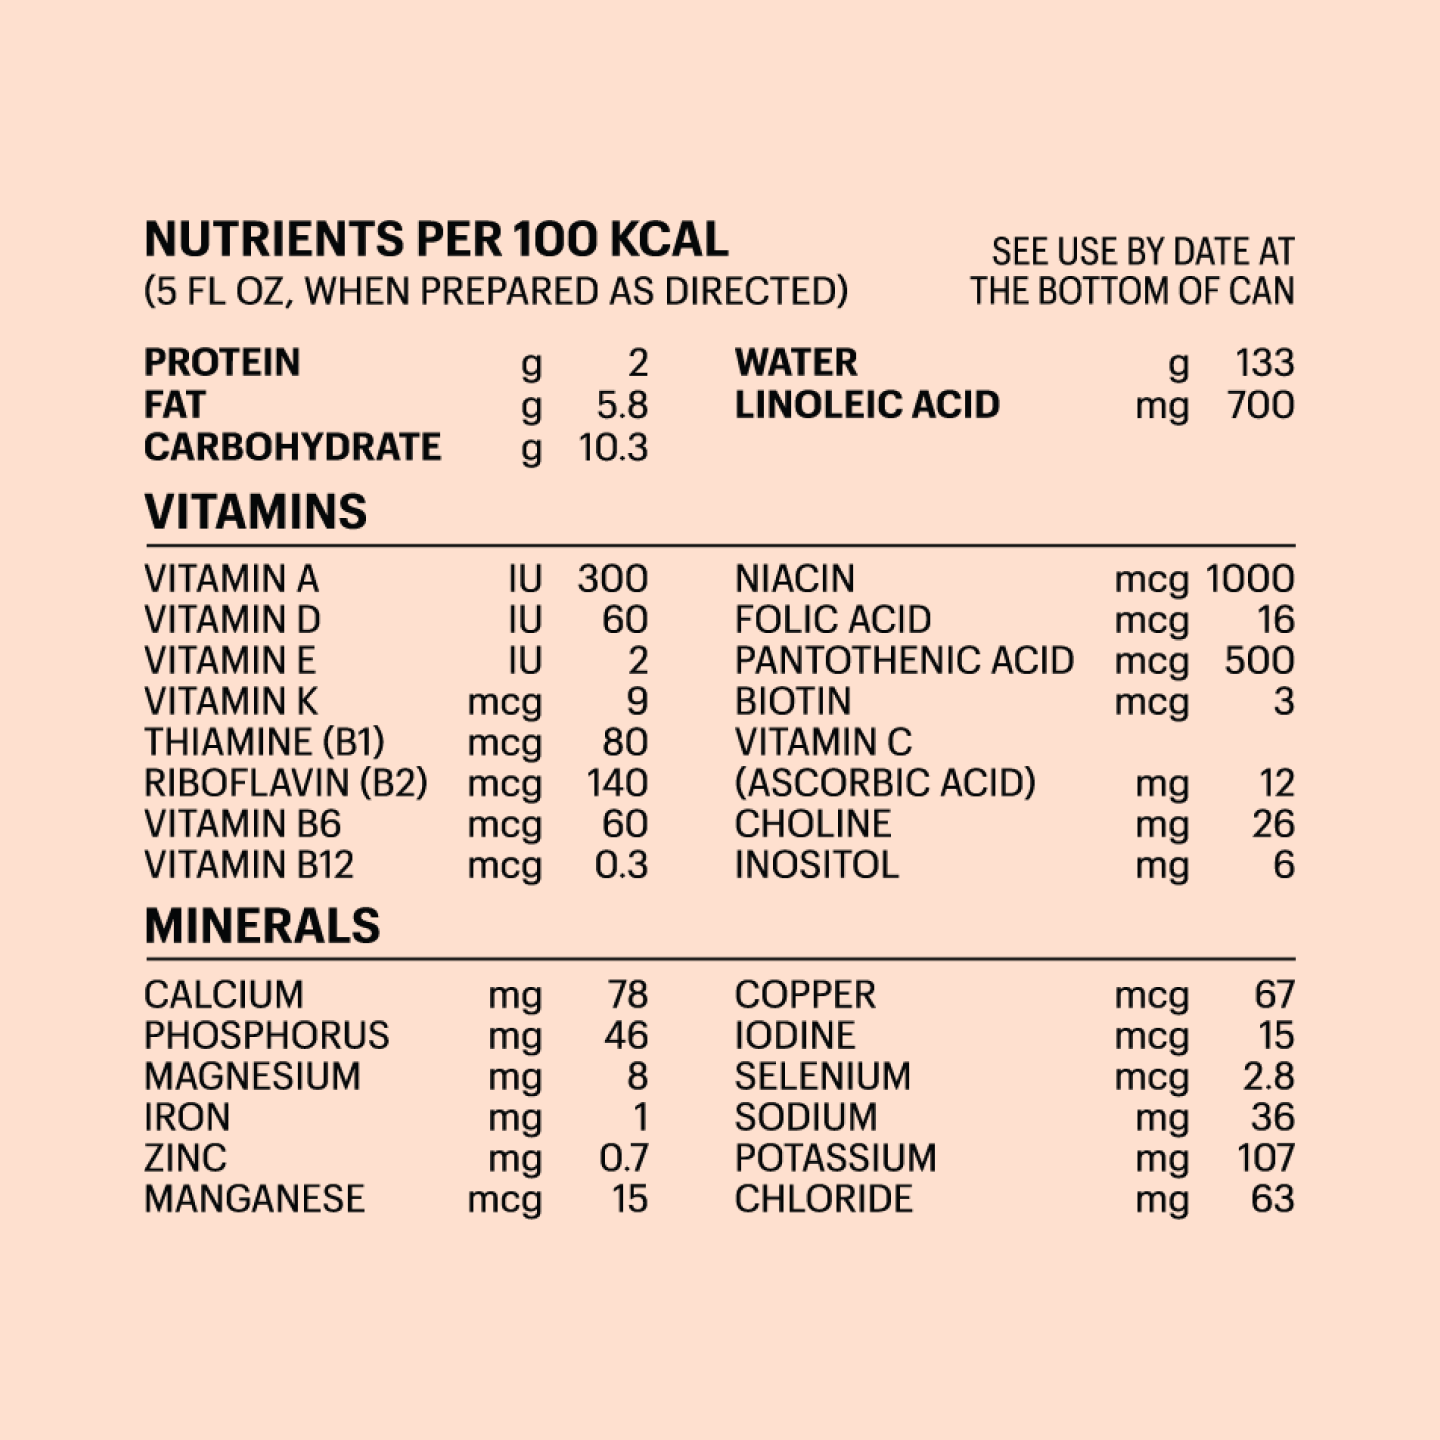 Nutrients, Free Full-Text